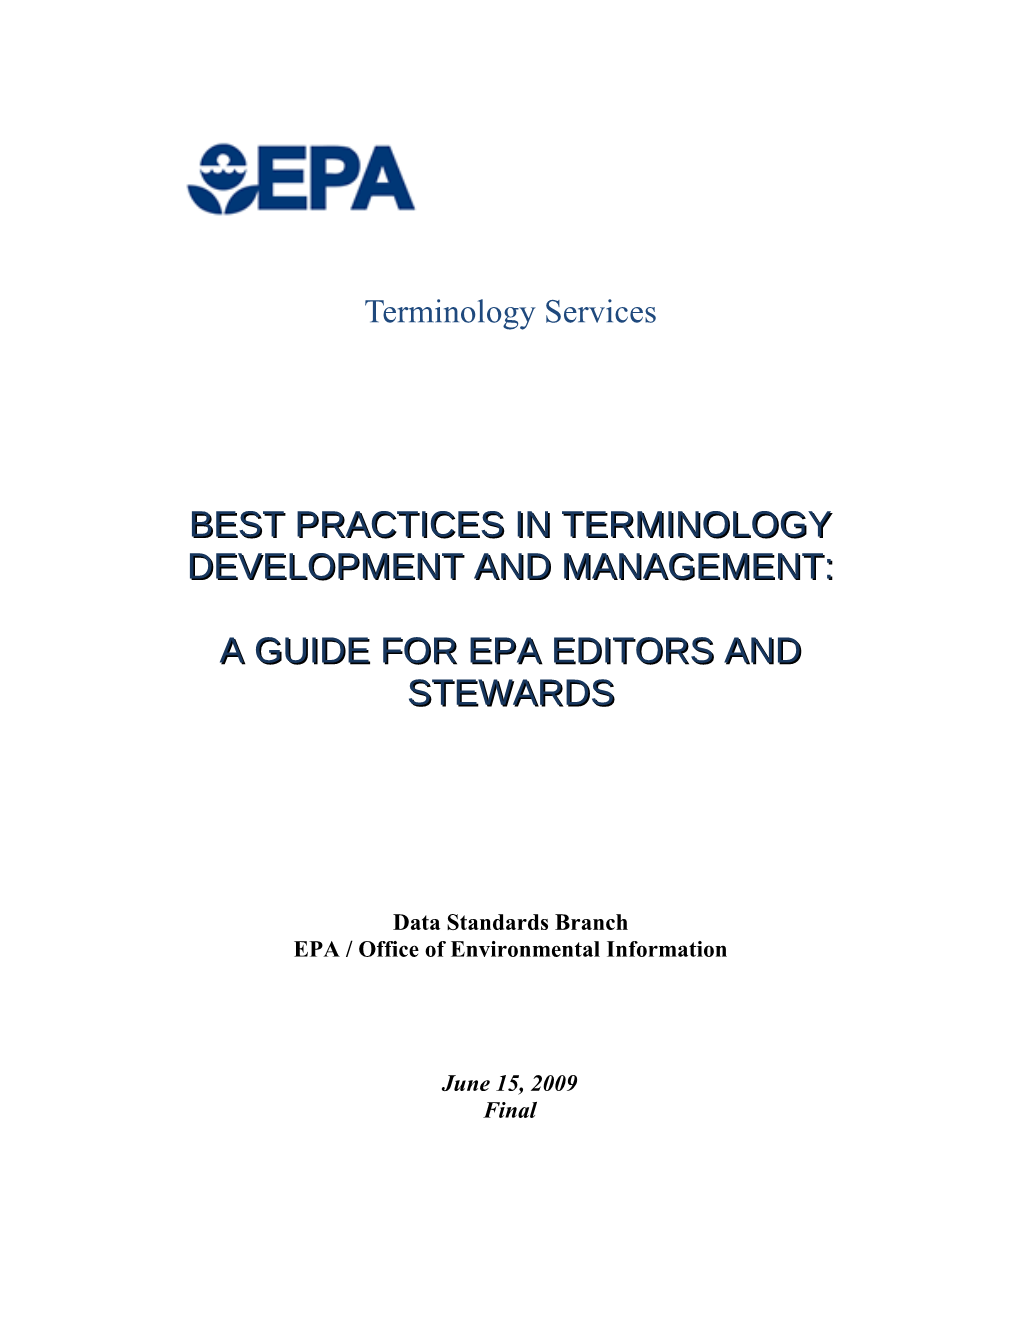 Proposed Outline for Terminology Development and Management Manual: a Guide for Editors